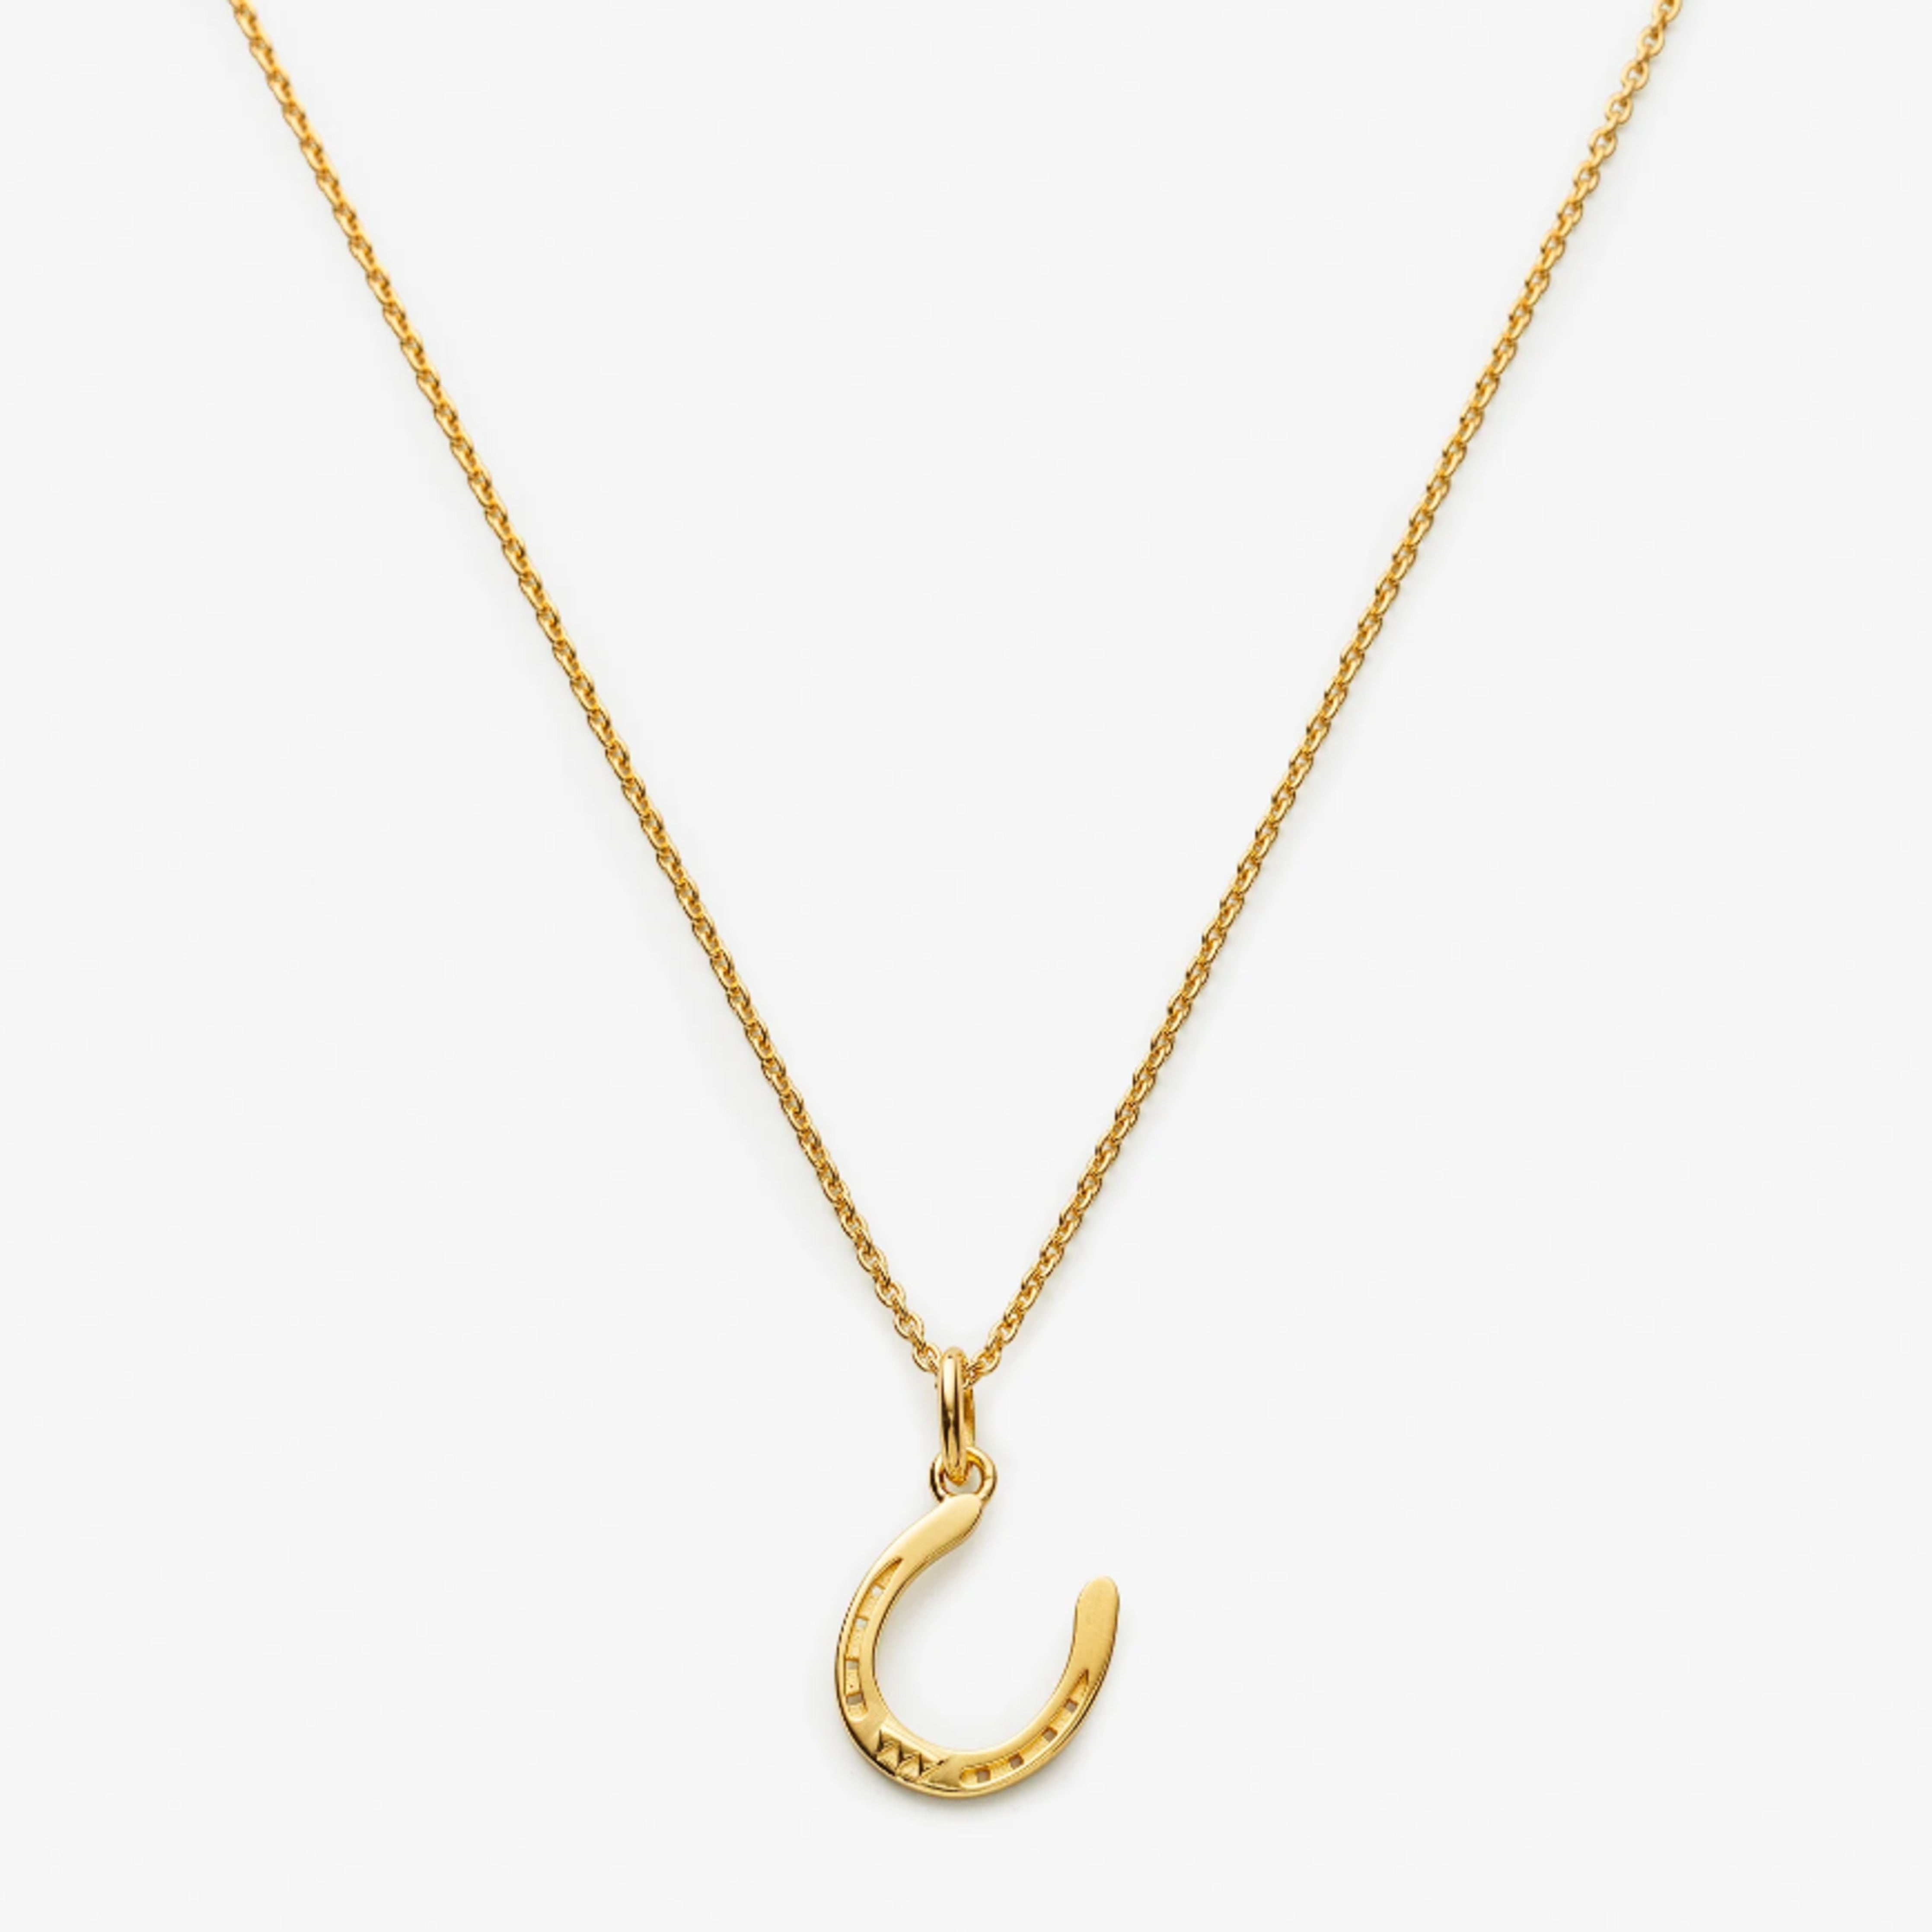 Get the Gallop Lucky Horseshoe Necklace